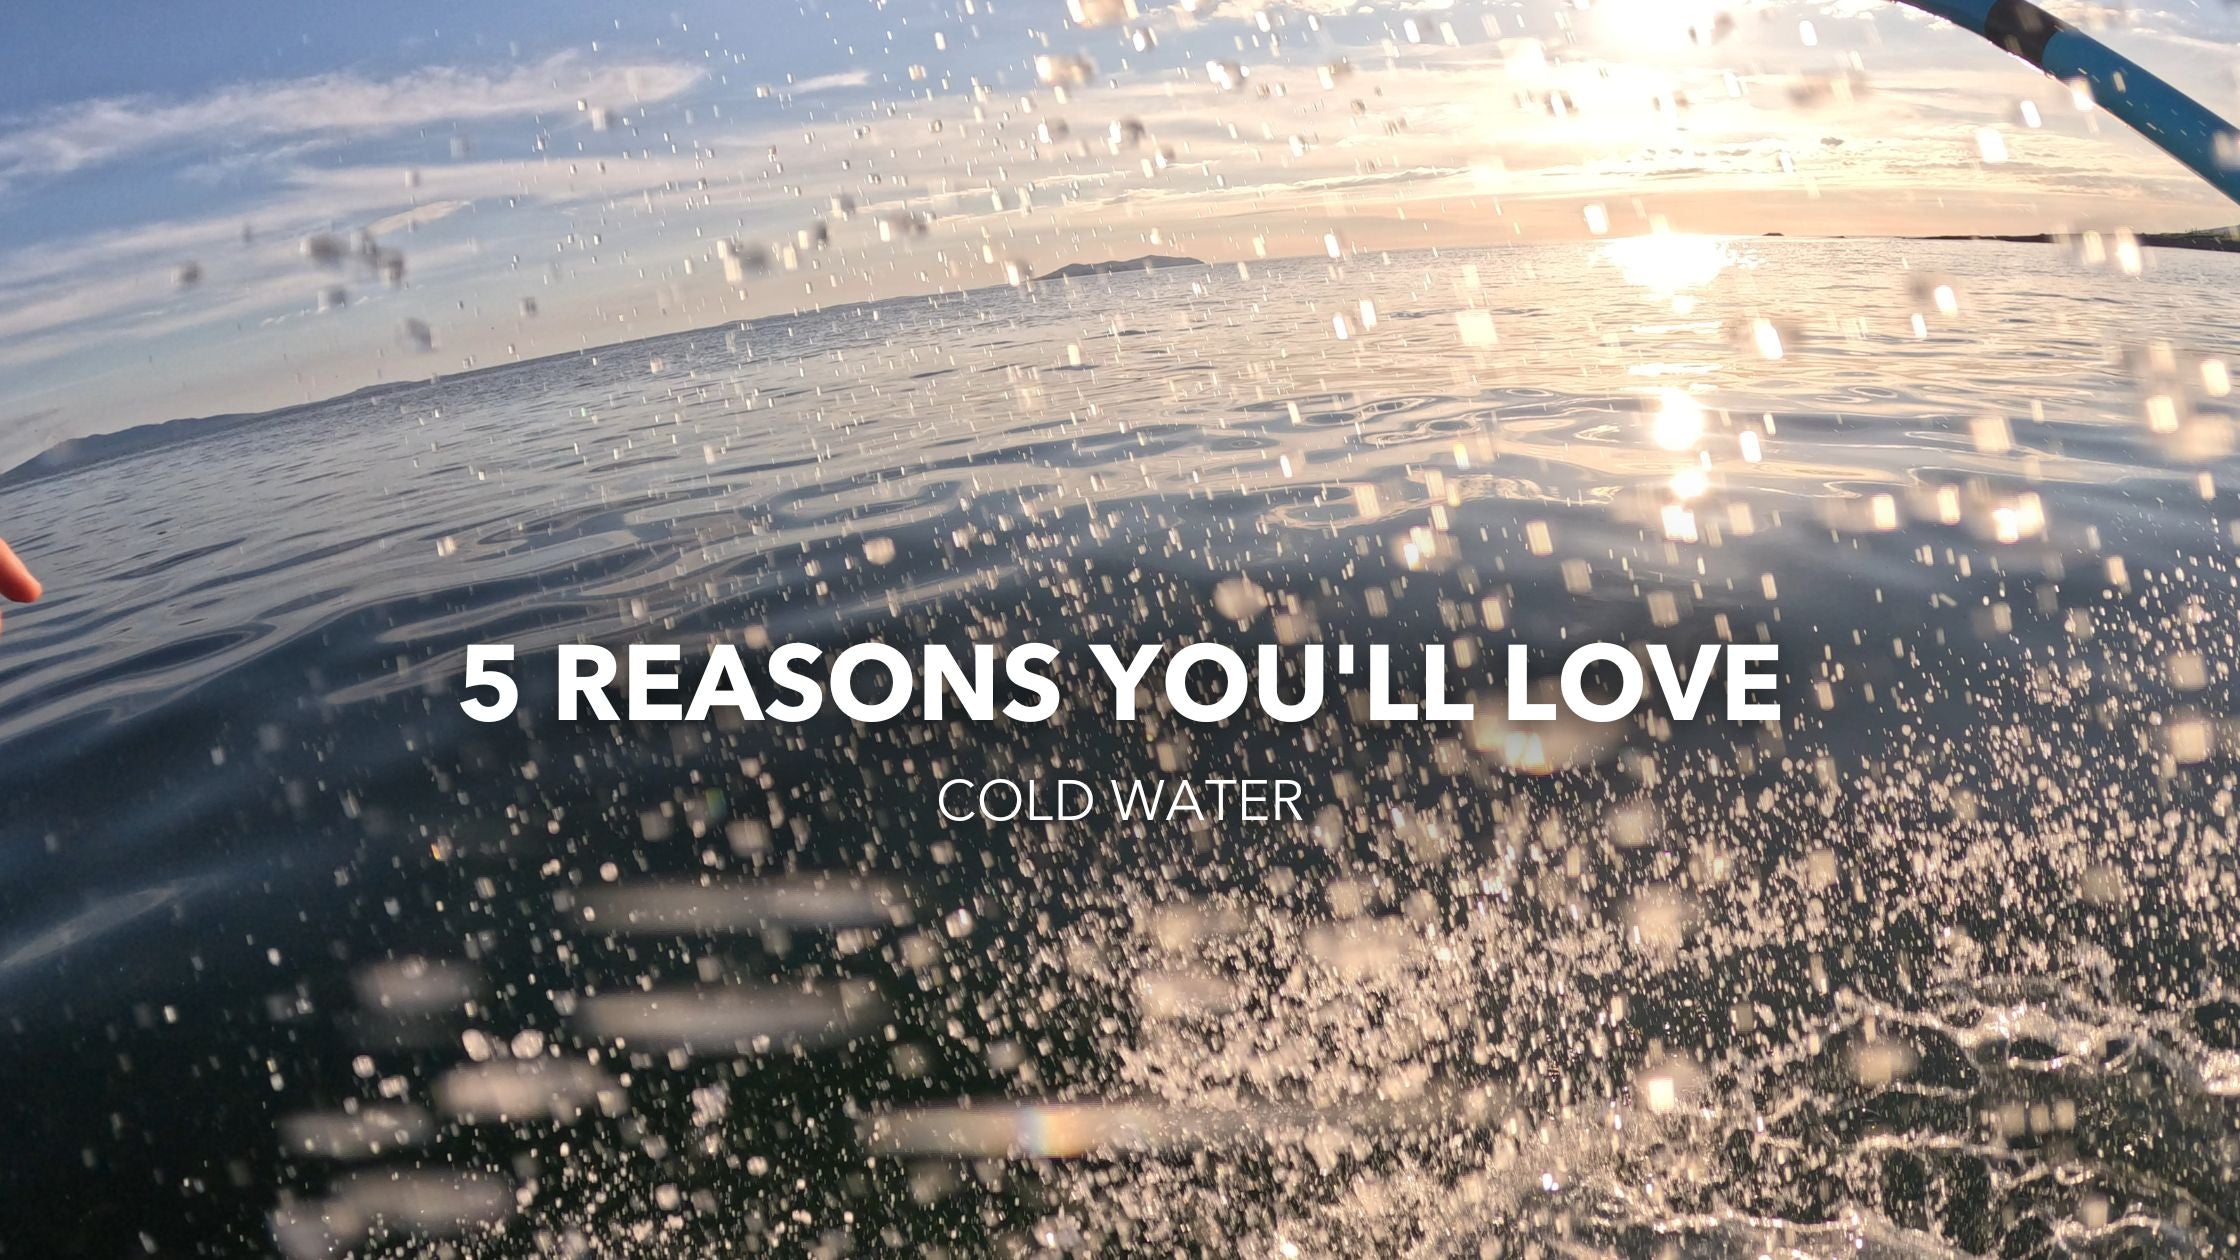 5 Reasons You'll Love Cold Water